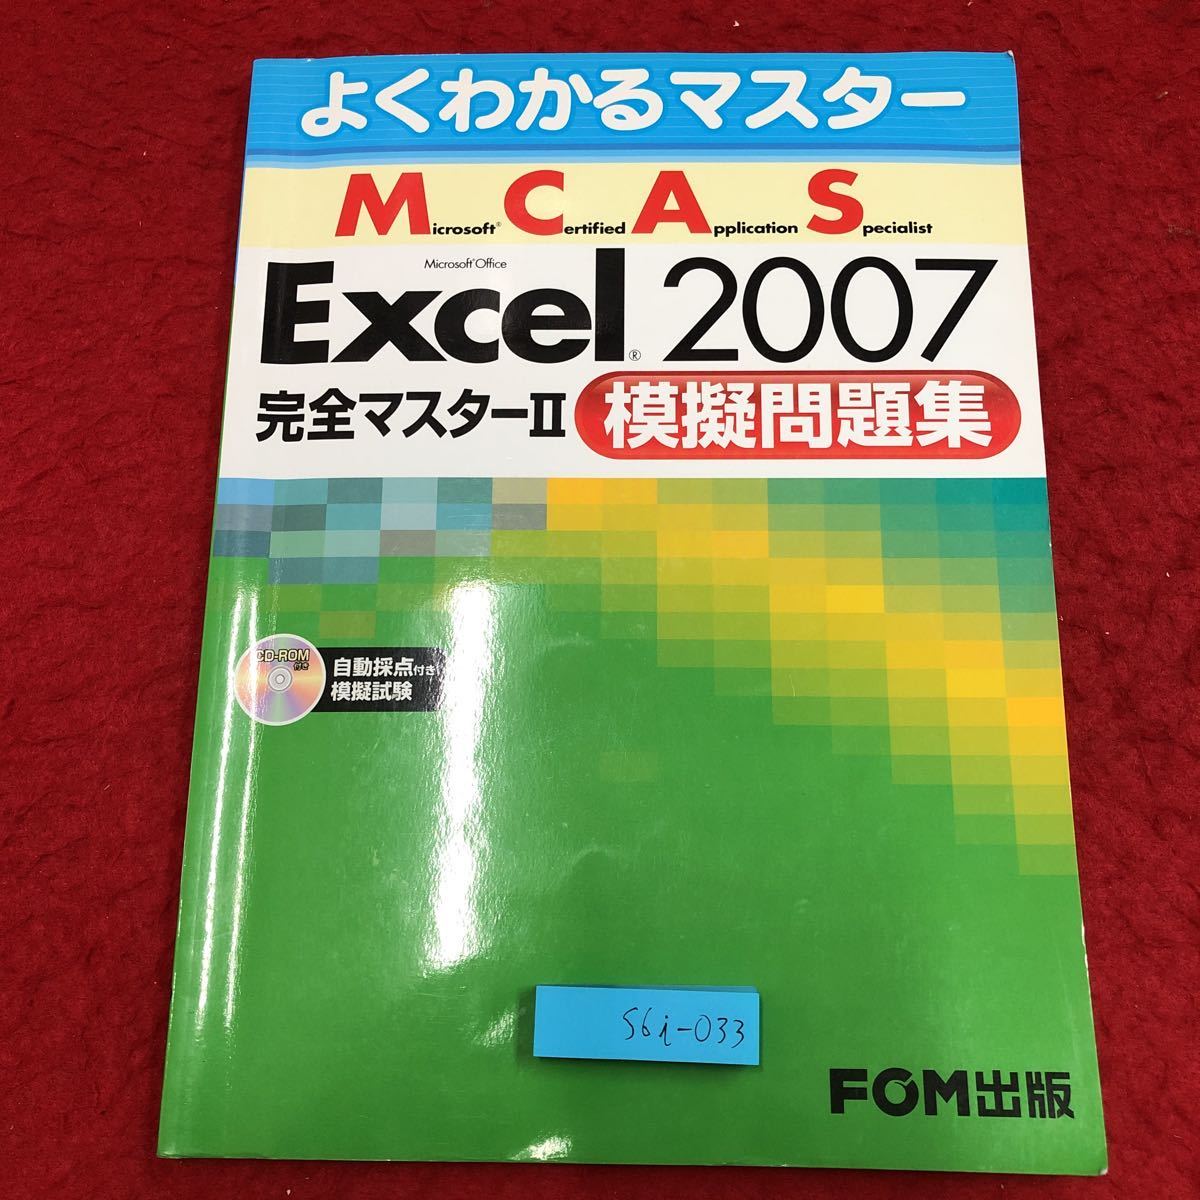 S6i-033 good understand master MCAS Excel 2007 complete master Ⅱ official recognition text appendix attaching 2010 year 2 month 3 day no. 3 version no. 6. issue FOM publish reference book finding employment 